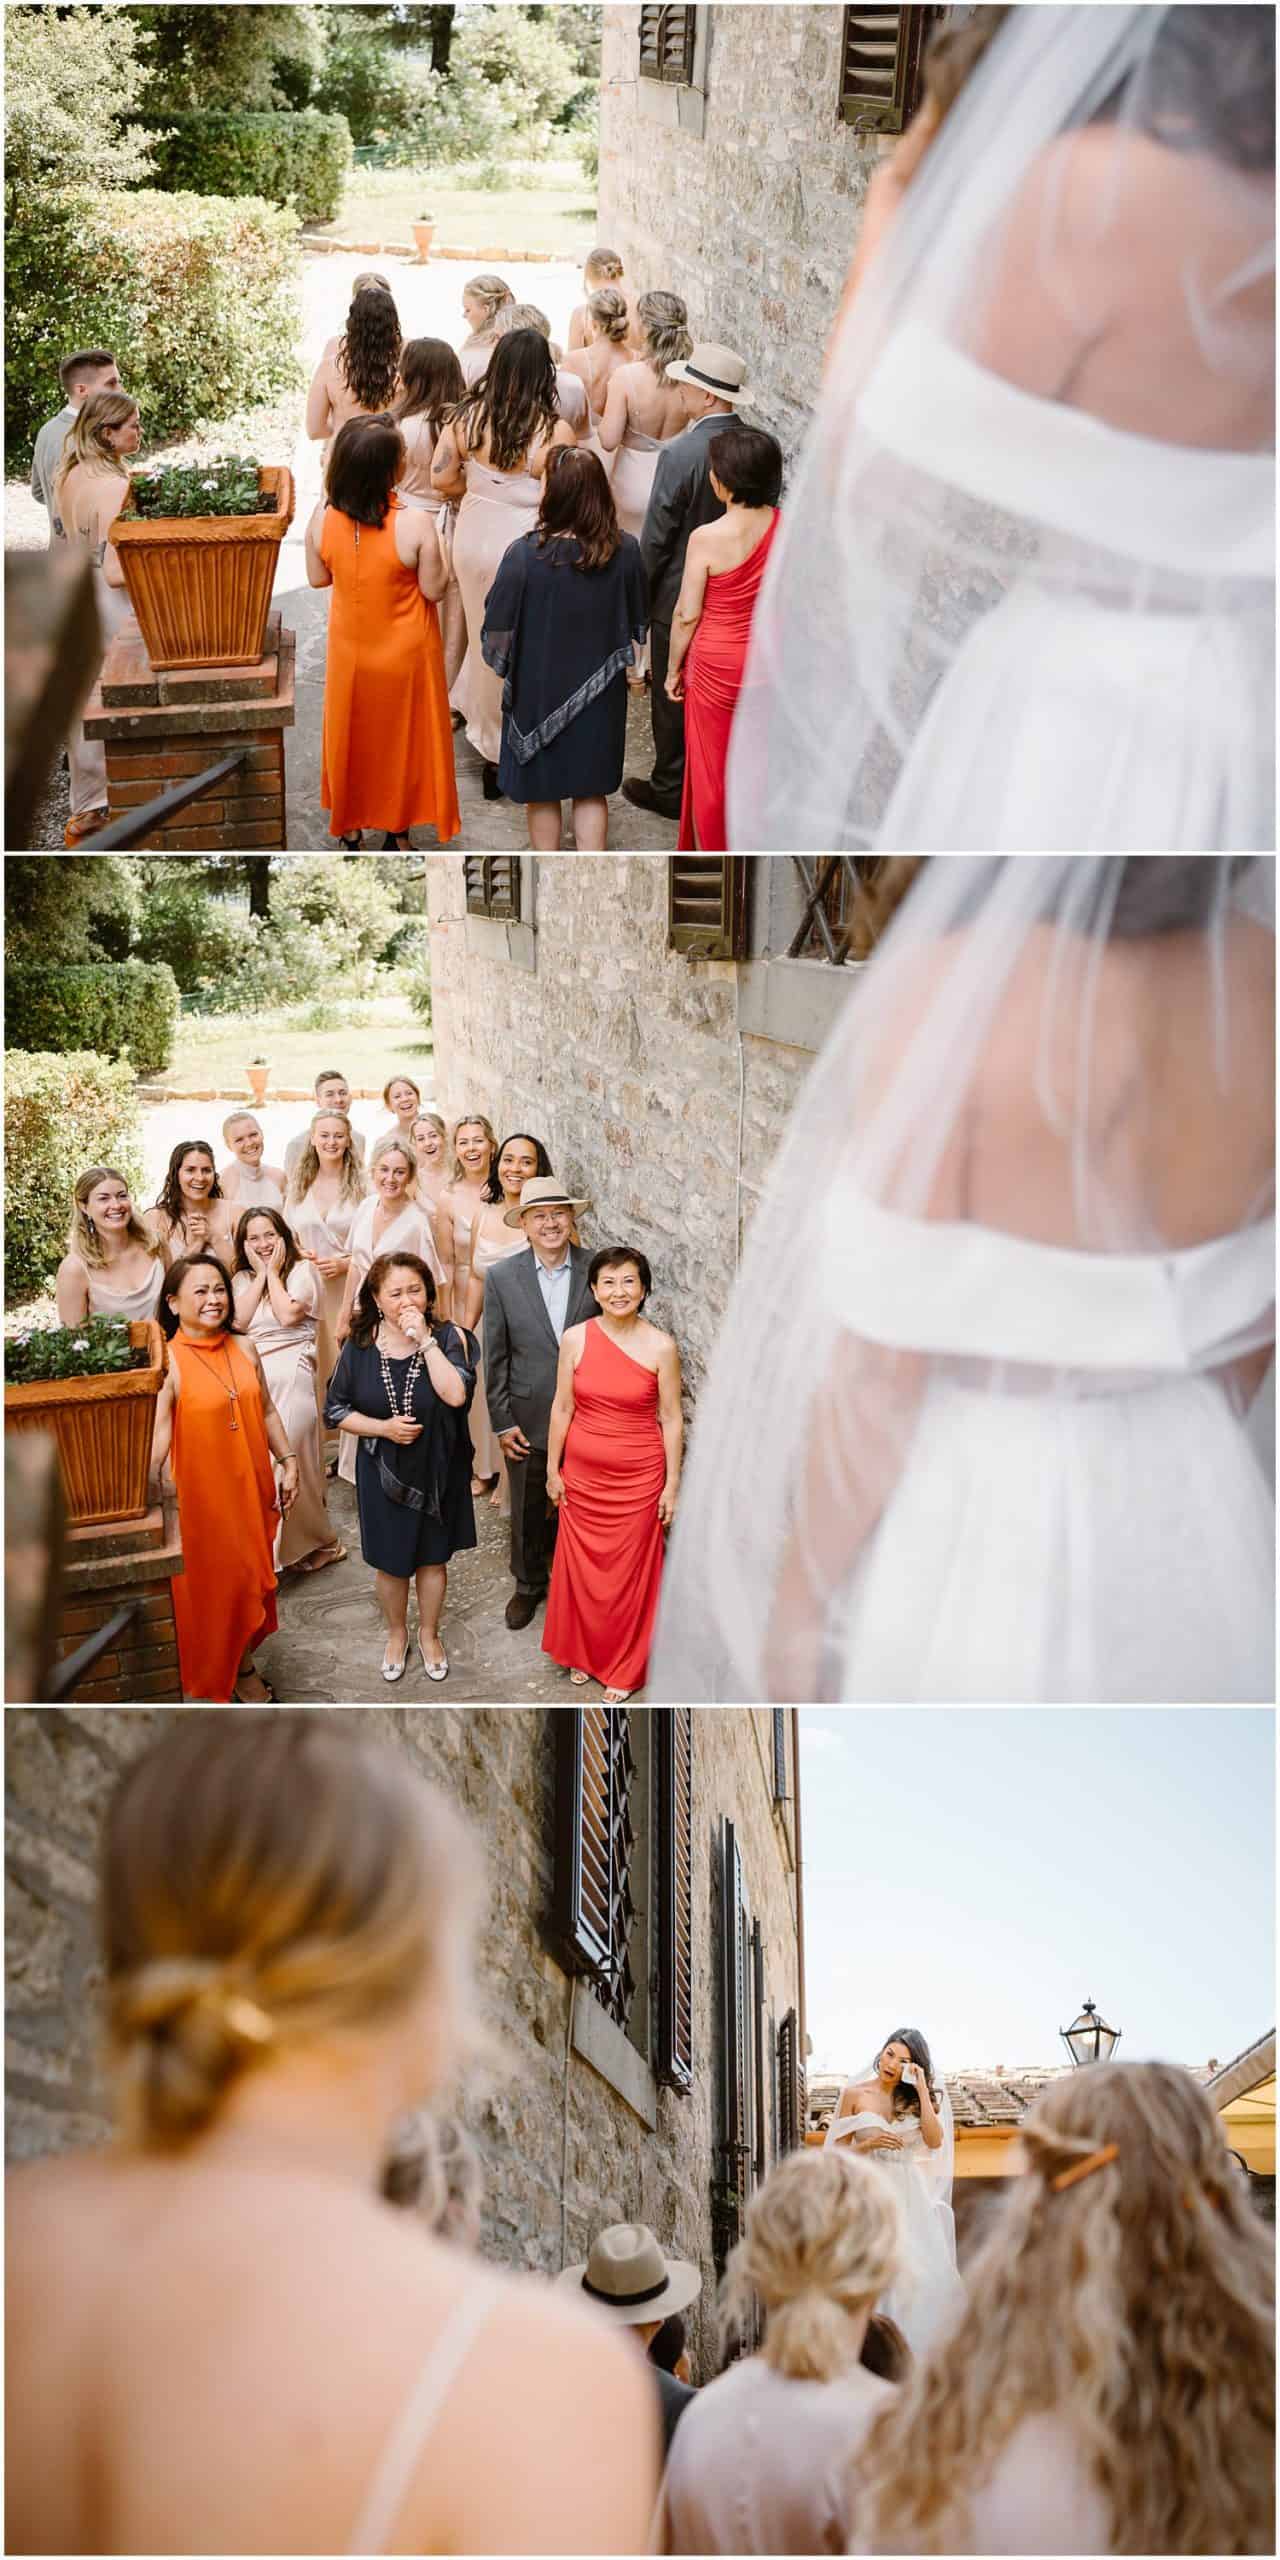 The bride is ready for her wedding ceremony at Borgo Castelvecchi in Tuscany, Italy